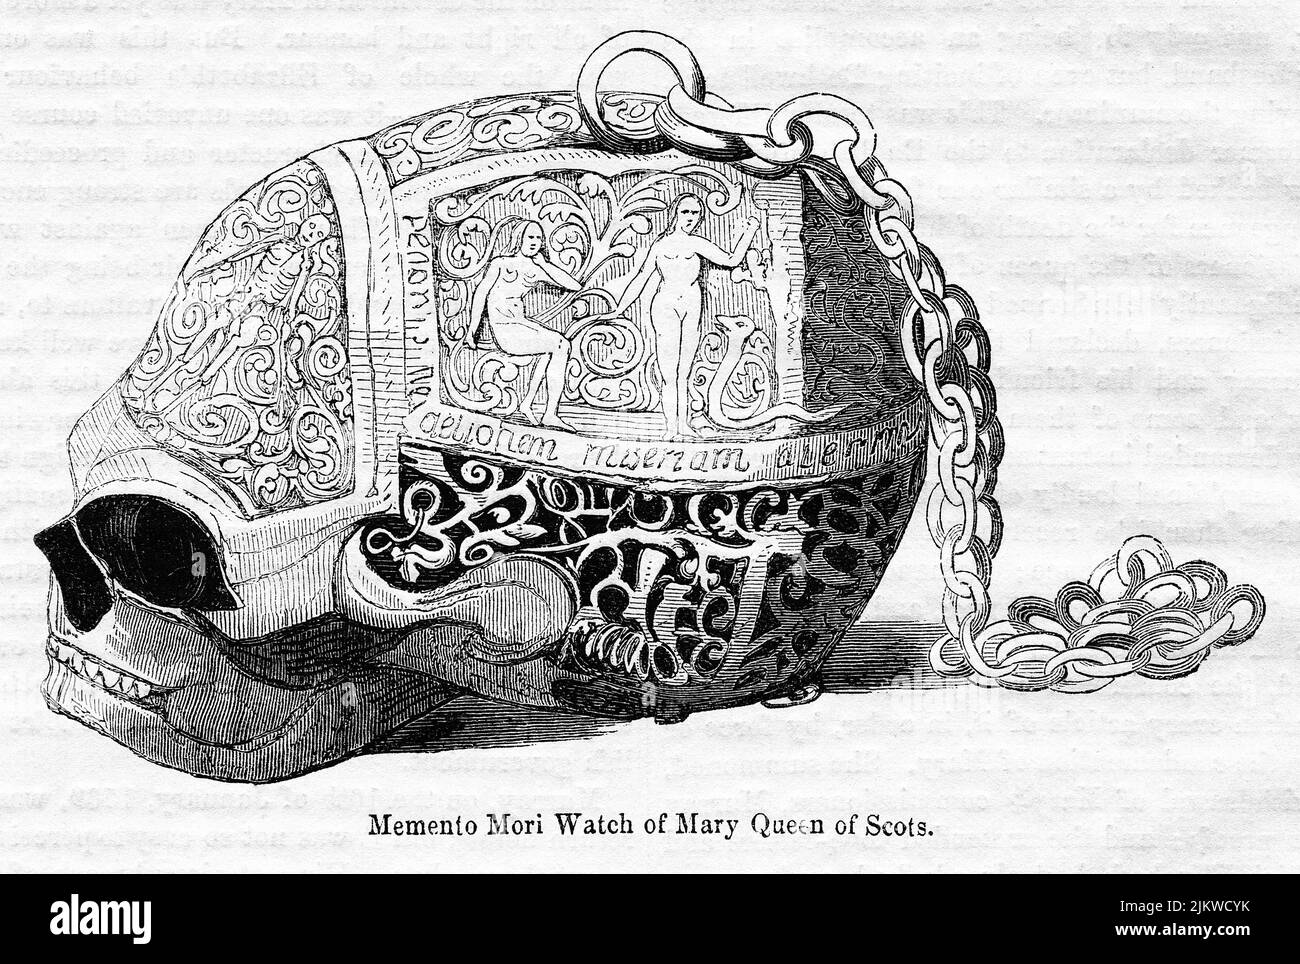 Memento Mori Watch of Mary Queen of Scots, Illustration from the Book, 'John Cassel’s Illustrated History of England, Volume II', text by William Howitt, Cassell, Petter, and Galpin, London, 1858 Stock Photo